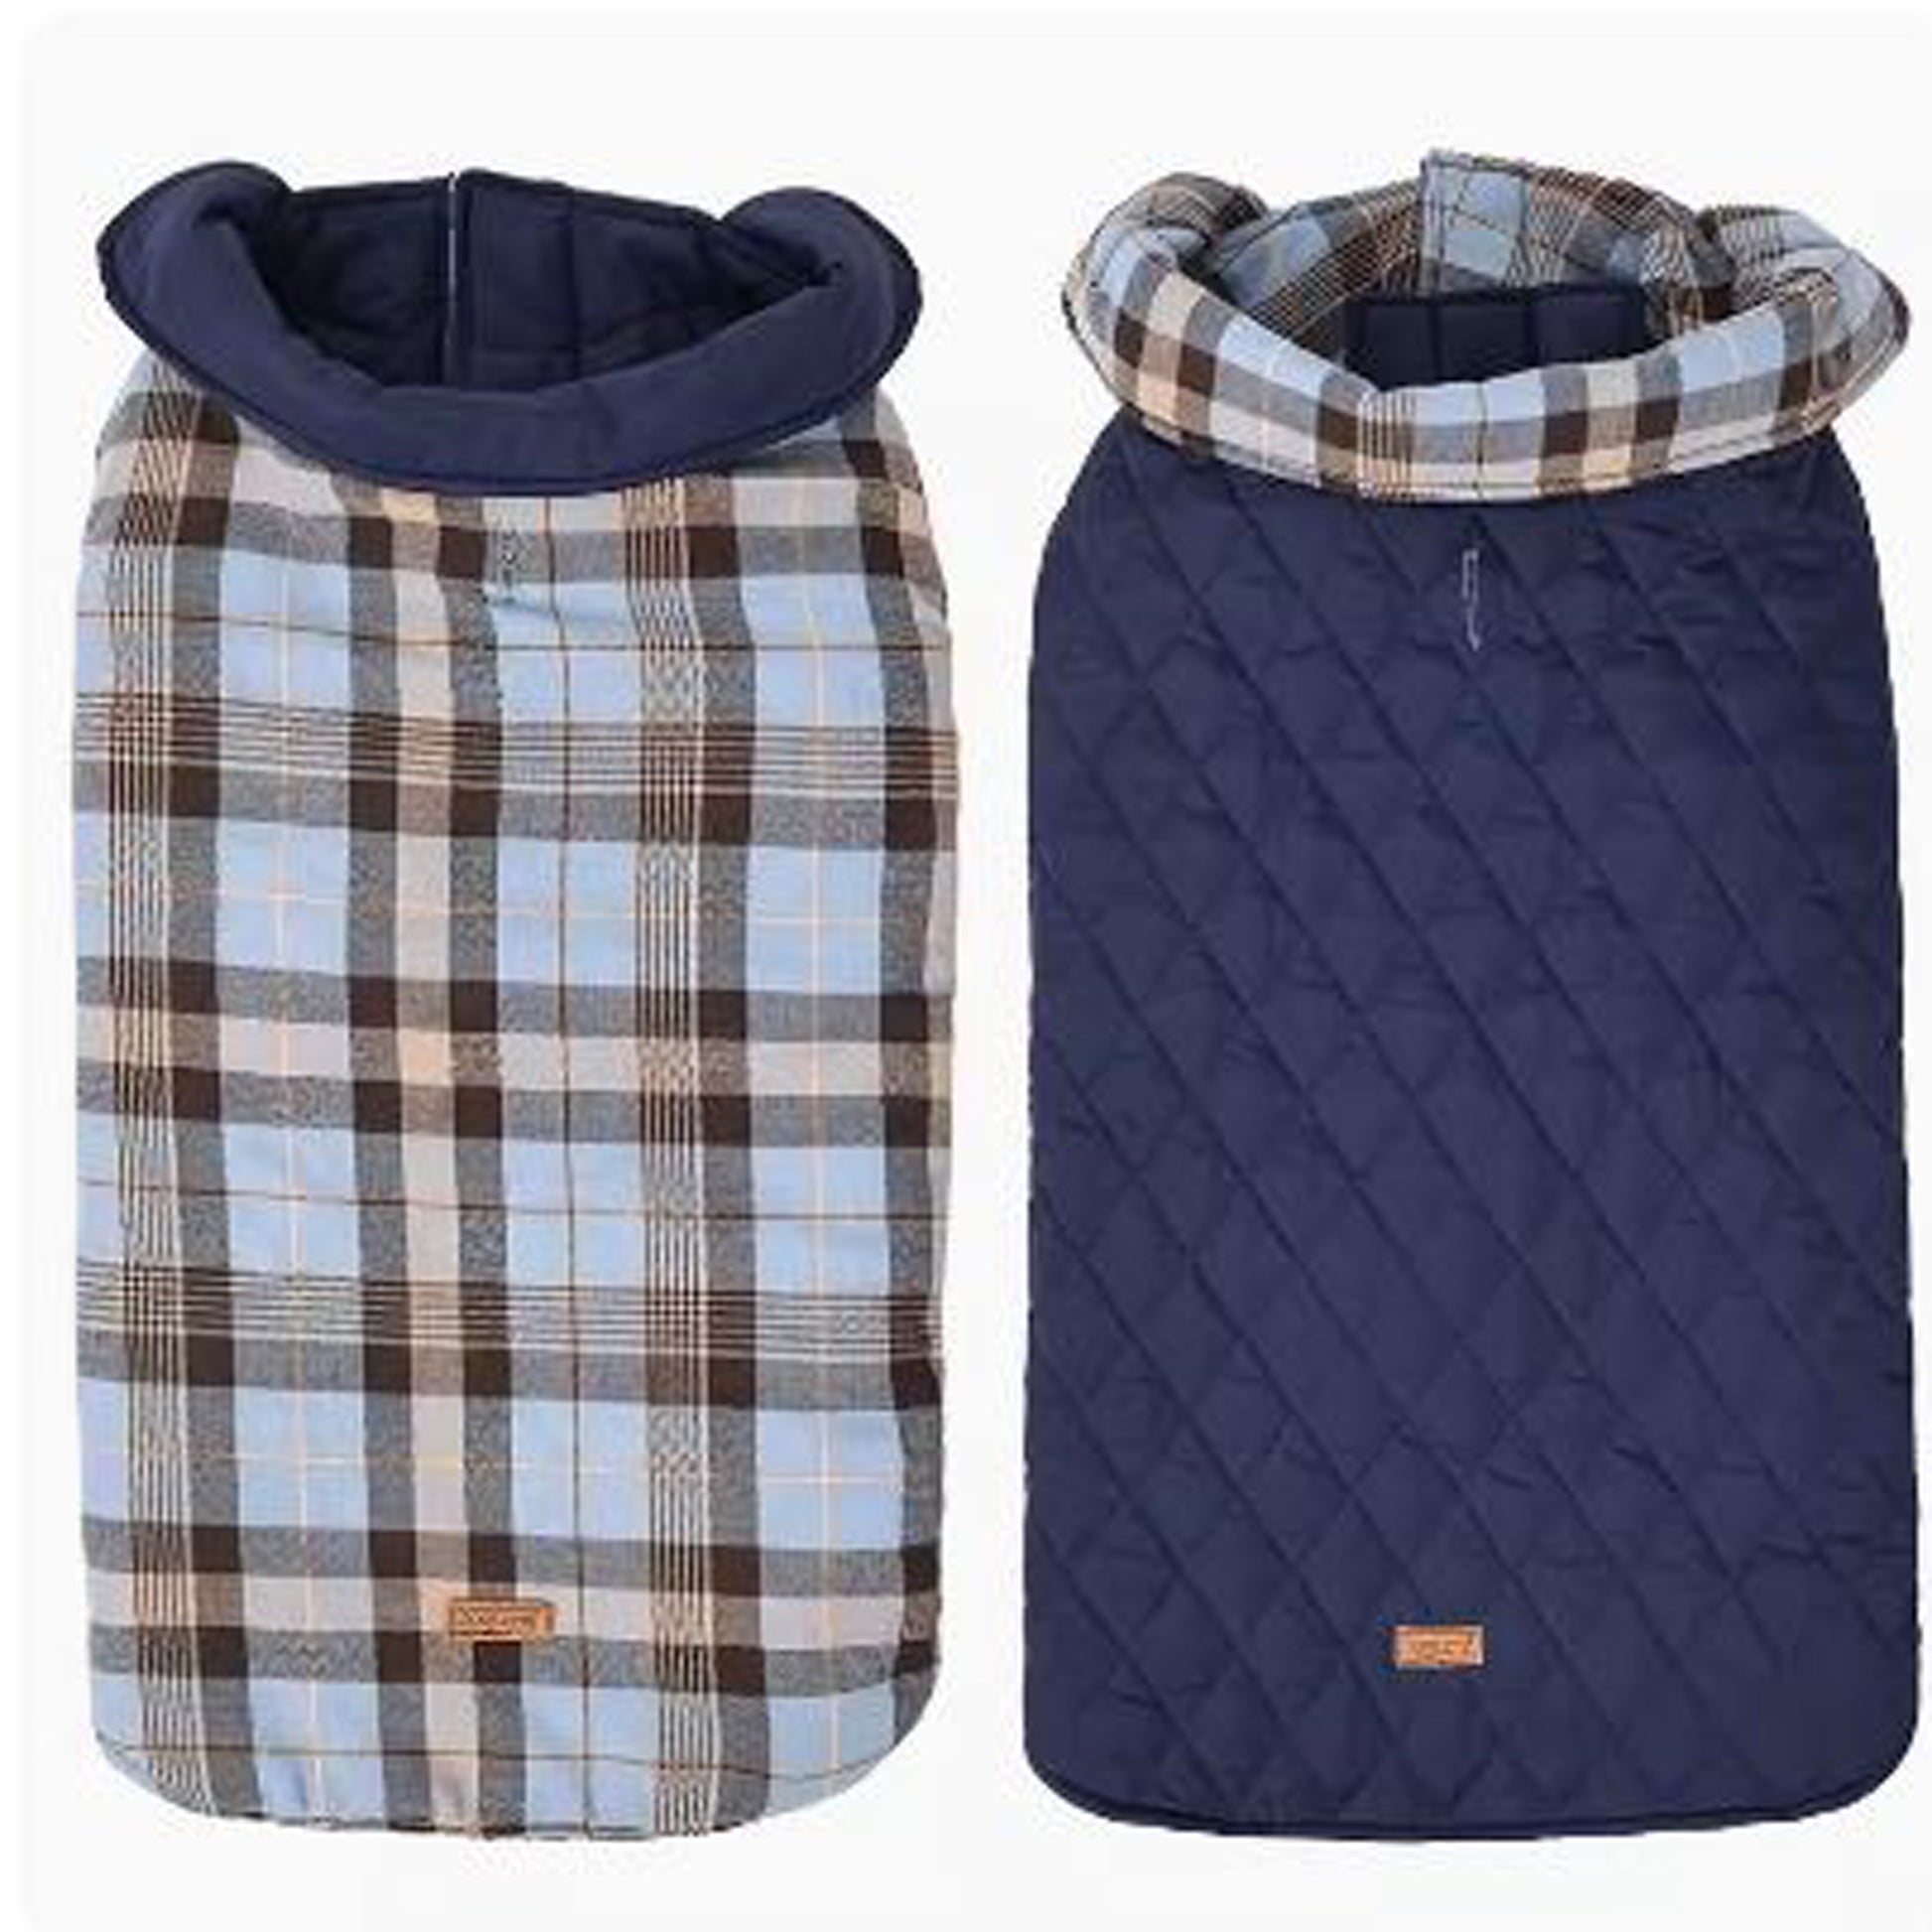 PlaidPup-Warm-and-Stylish-Frenchie-Plaid-Vest-Double-Sided-Winter-Apparel-www.frenchie.shop